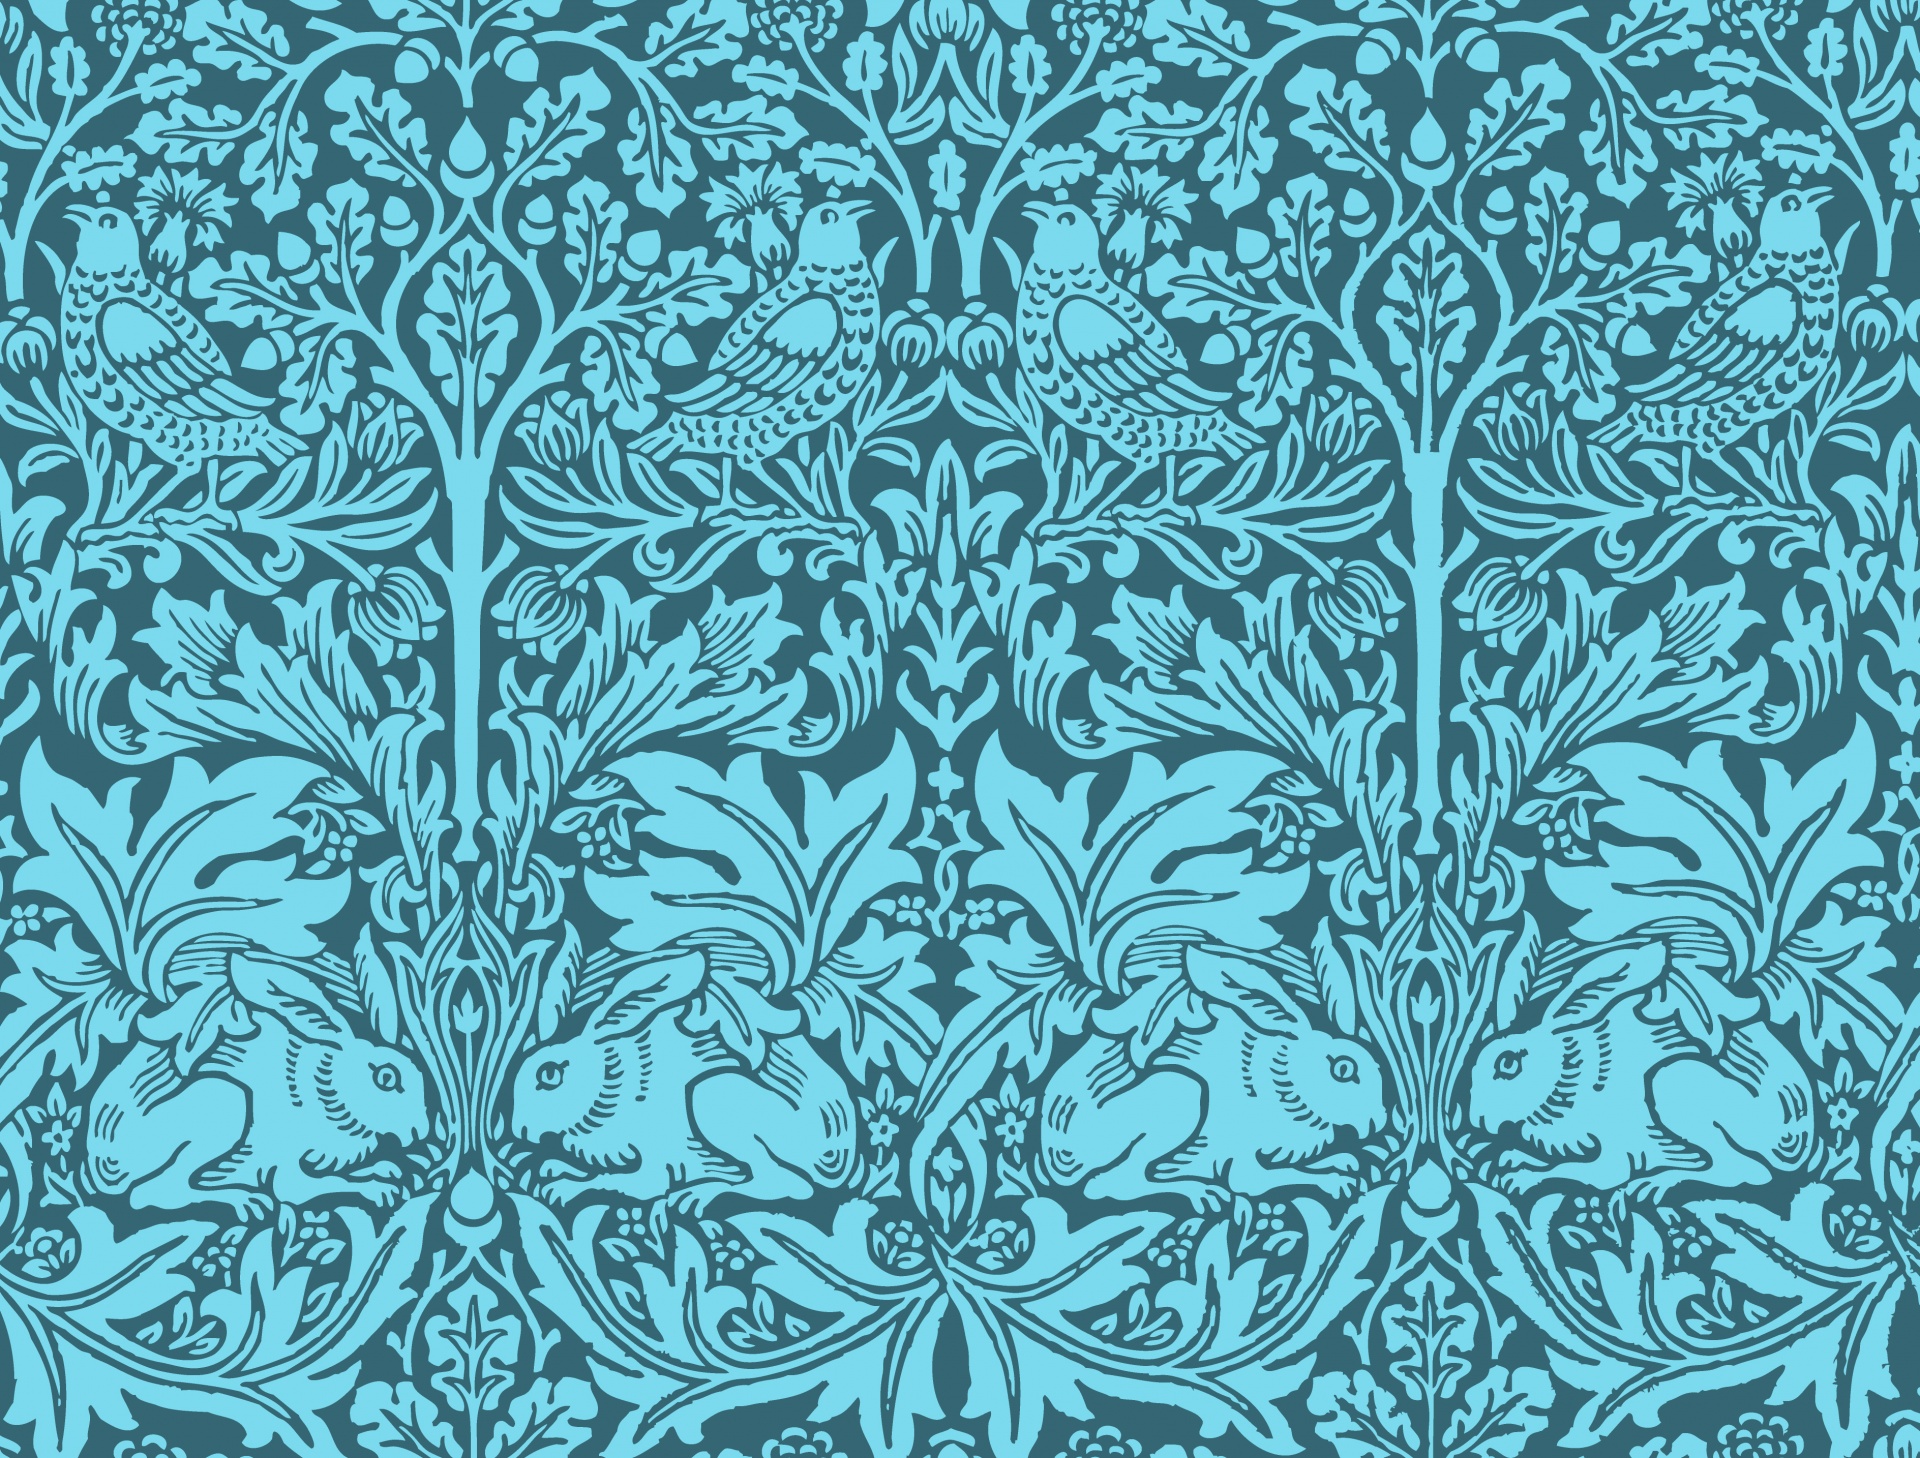 Vintage style wallpaper with birds, rabbits and leaves, modern illustration based on brer rabbit by William Morris